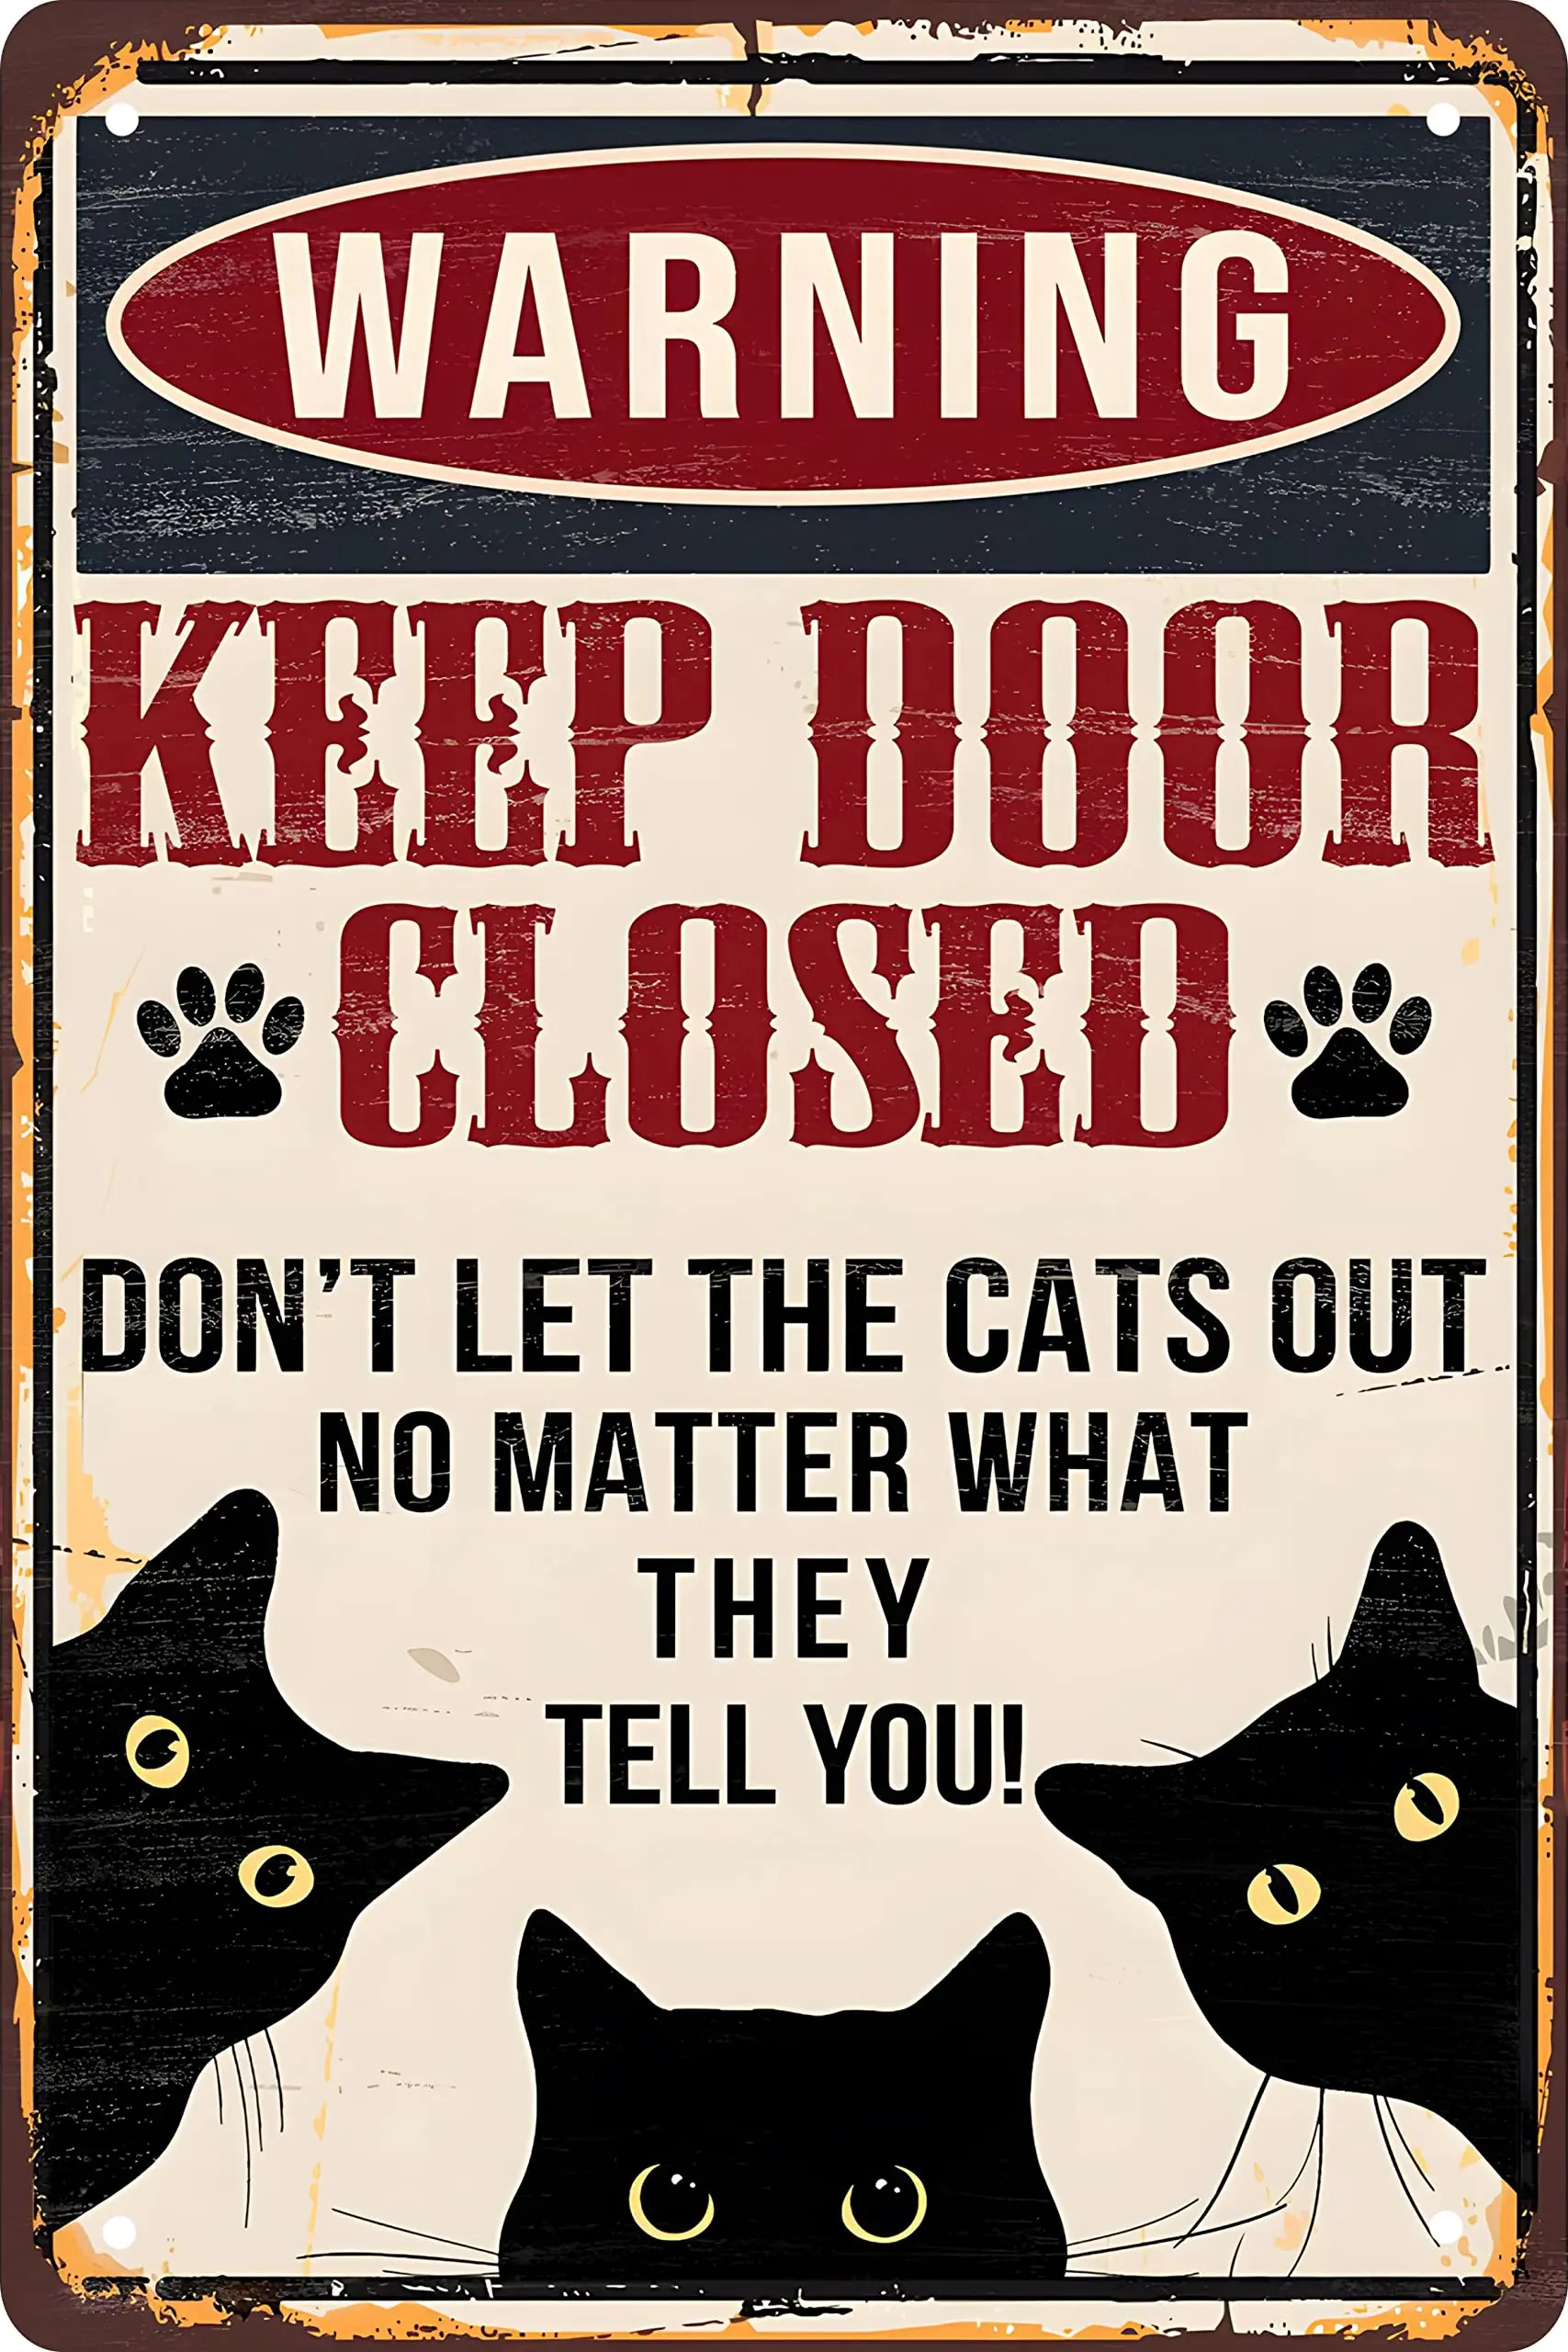 

Funny Black Cat Warning Decor Retro Metal Tin Sign - Keep Door Closed Don't Let The Cats Out No Matter What They Tell You Art